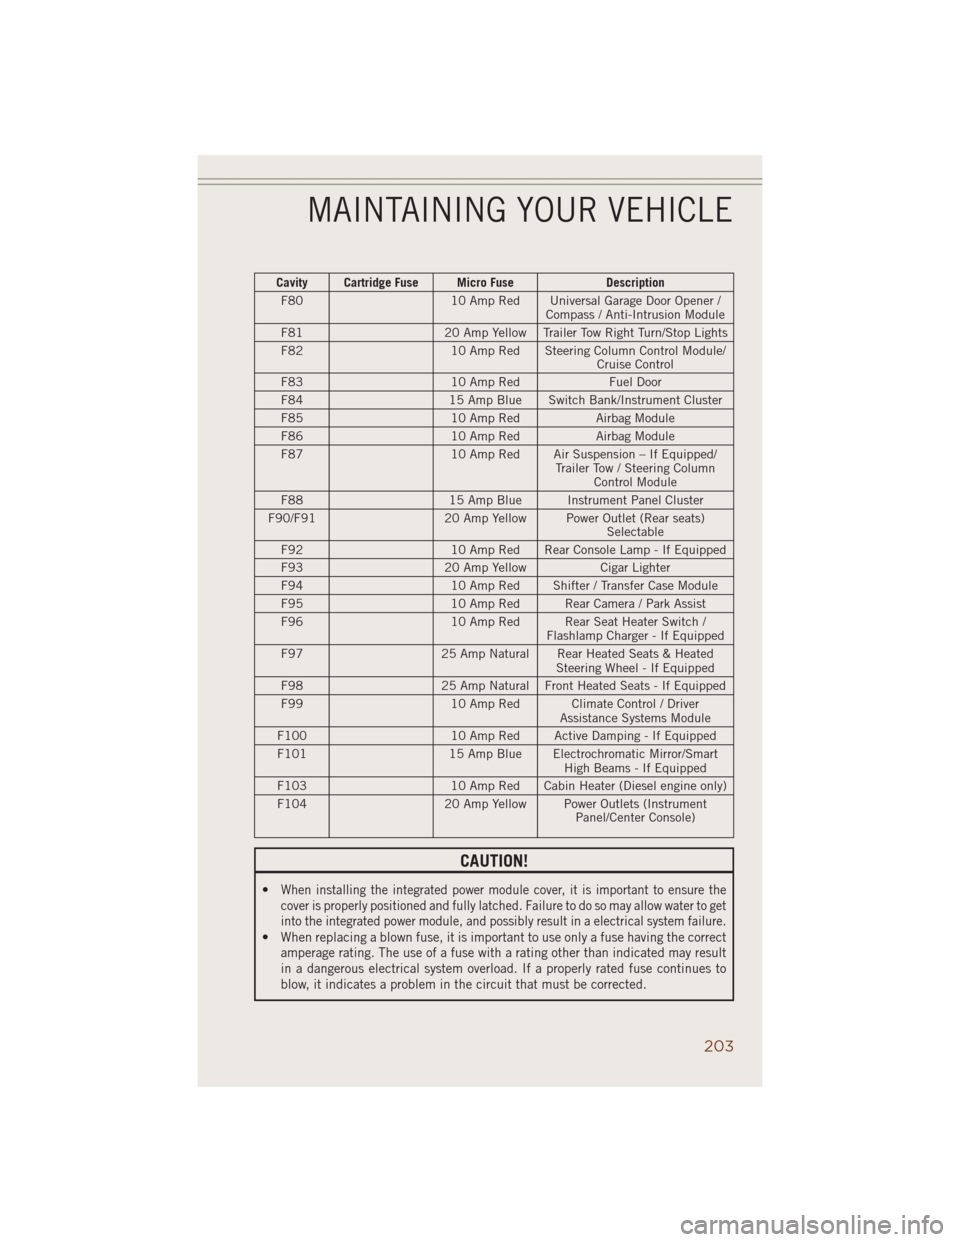 JEEP GRAND CHEROKEE 2014 WK2 / 4.G Manual PDF Cavity Cartridge Fuse Micro Fuse Description
F80 10 Amp Red Universal Garage Door Opener /
Compass / Anti-Intrusion Module
F81 20 Amp Yellow Trailer Tow Right Turn/Stop Lights
F82 10 Amp Red Steering 